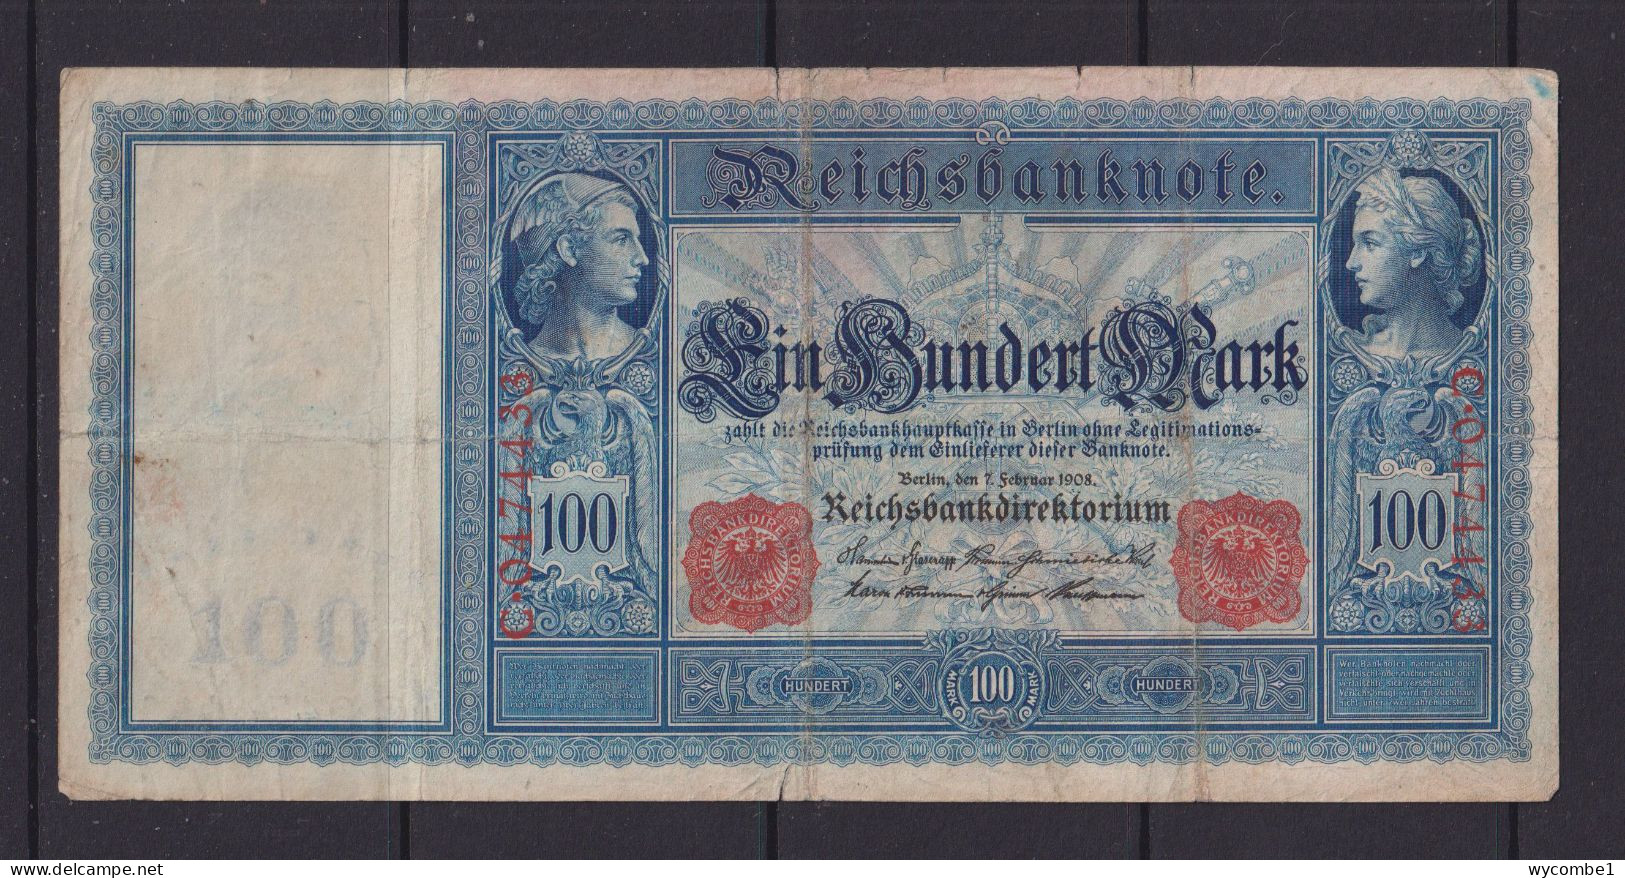 GERMANY - 1908 Reichsbanknote  100 Mark Circulated Banknote - 100 Mark